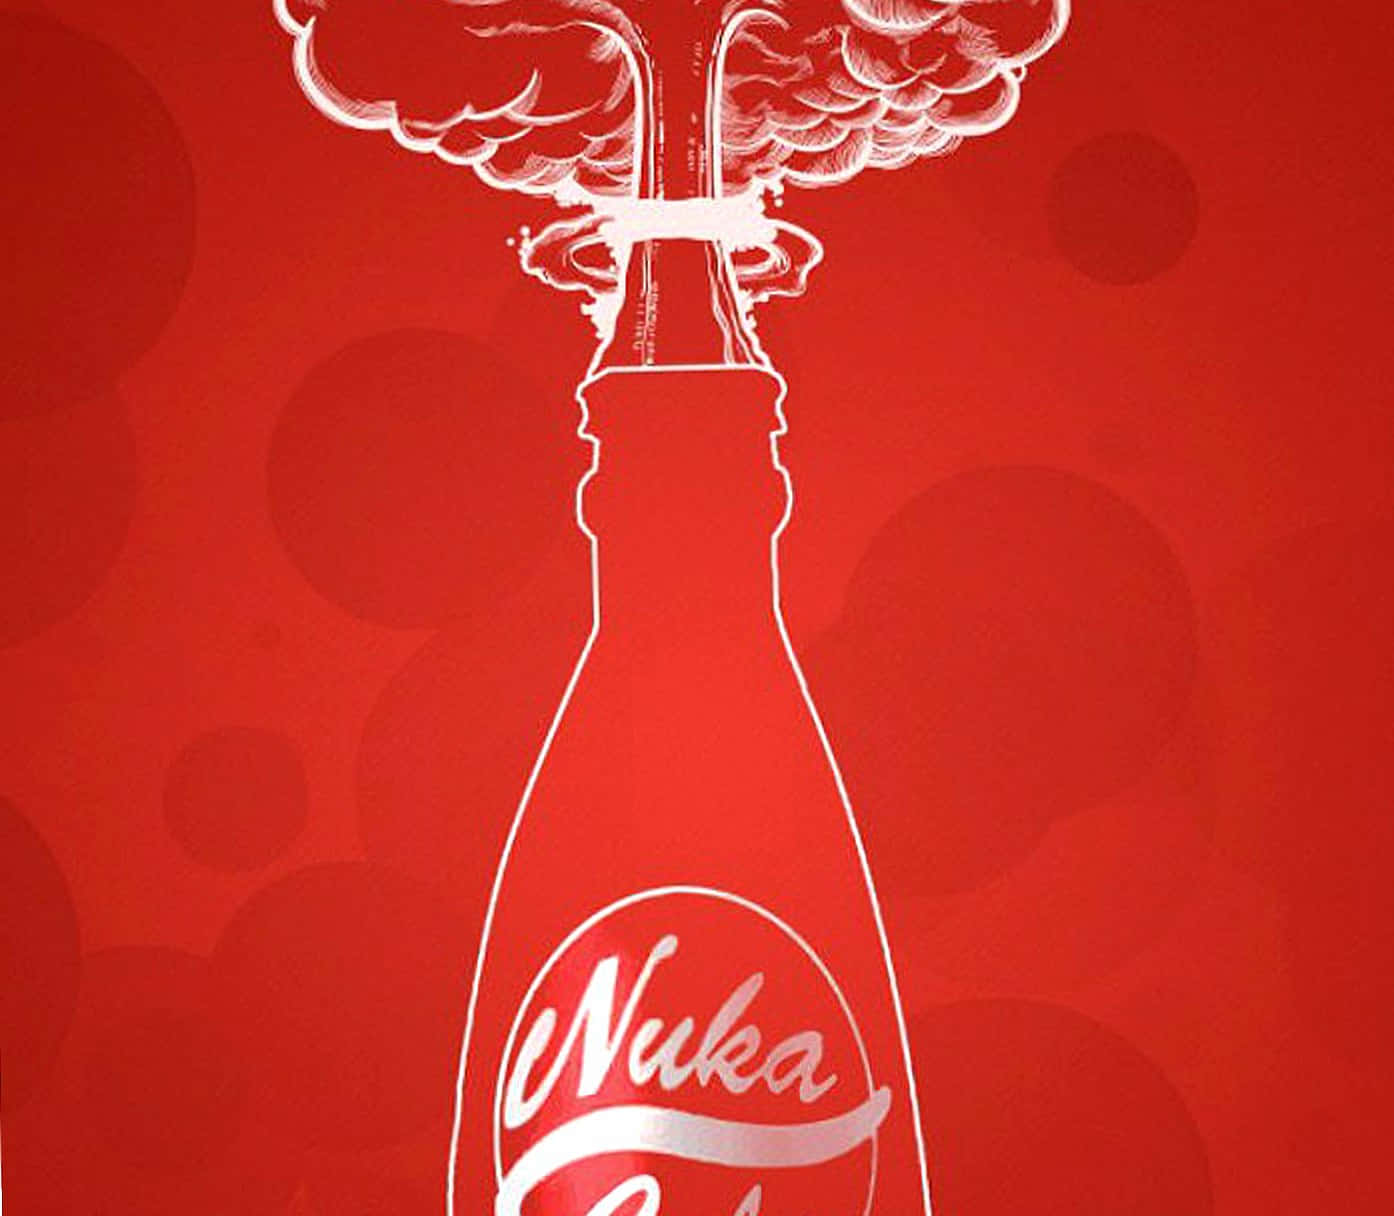 Enjoy the taste of Nuka Cola, the soda that refreshes you in the post-apocalyptic world! Wallpaper